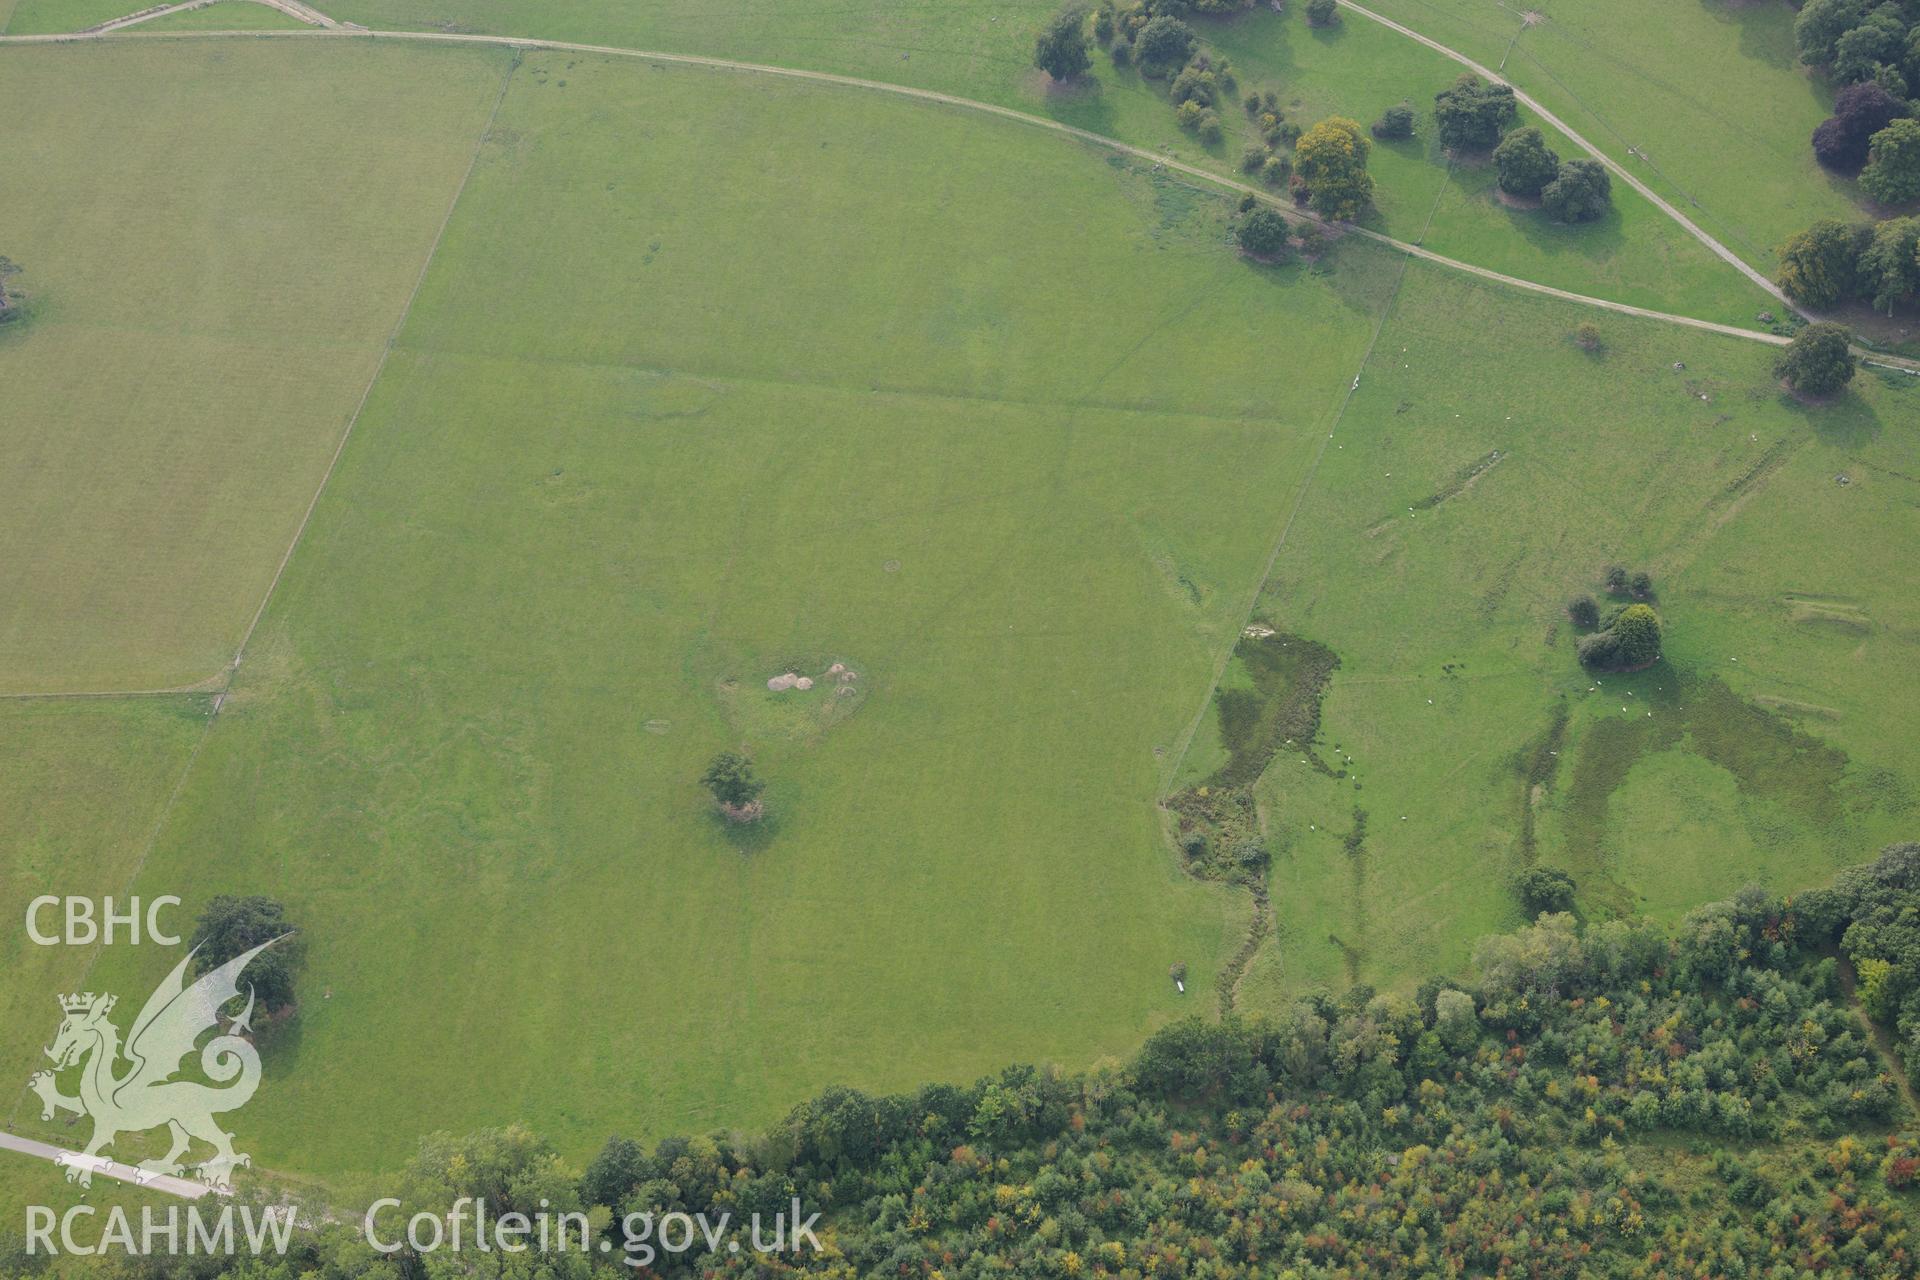 St. George's well and First World War practise trenches at Kinmel Park. Oblique aerial photograph taken during the Royal Commission's programme of archaeological aerial reconnaissance by Toby Driver on 11th September 2015.